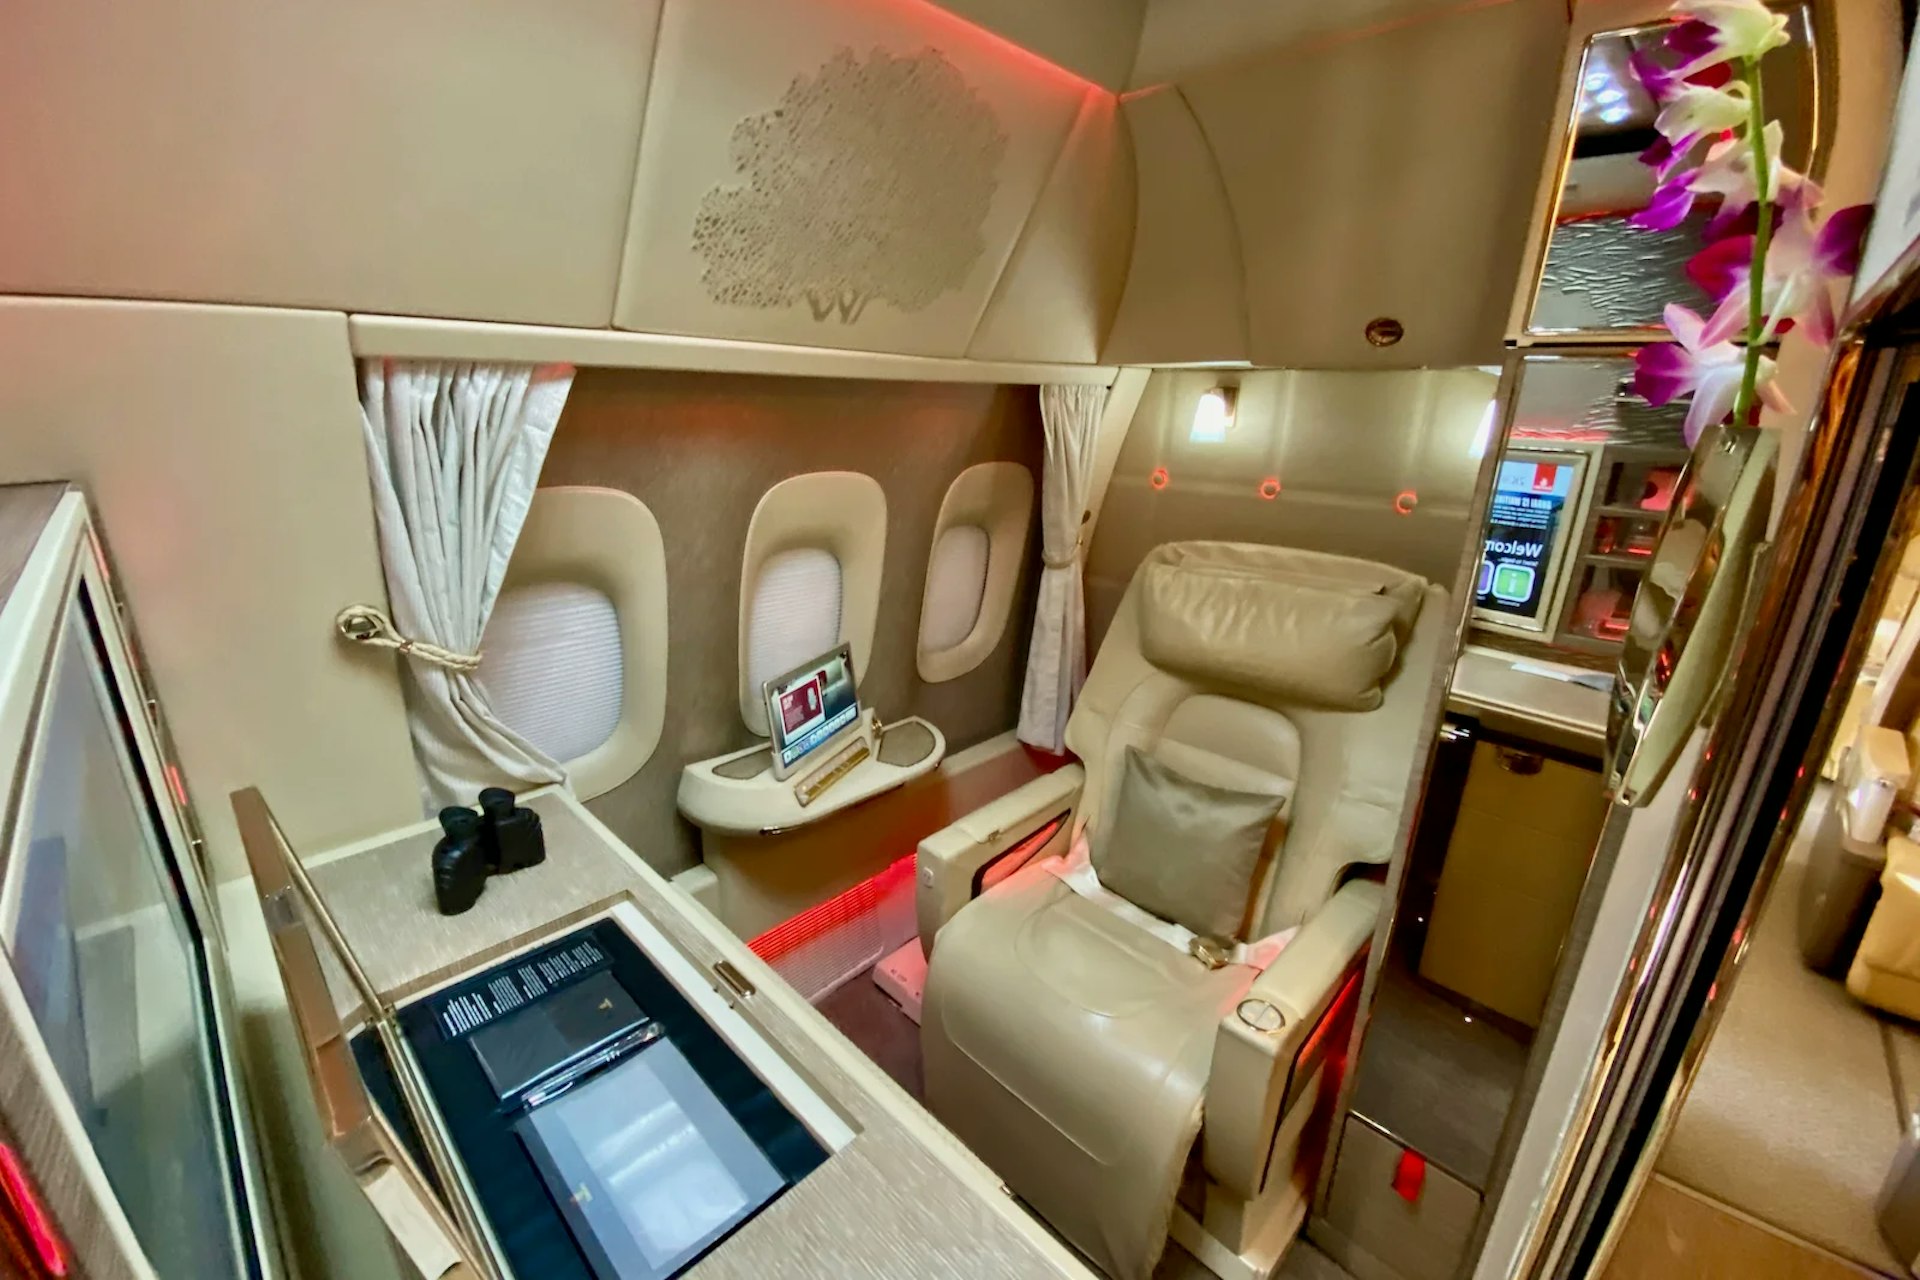 Emirates' new 777-300ER product is one of the most luxurious out there